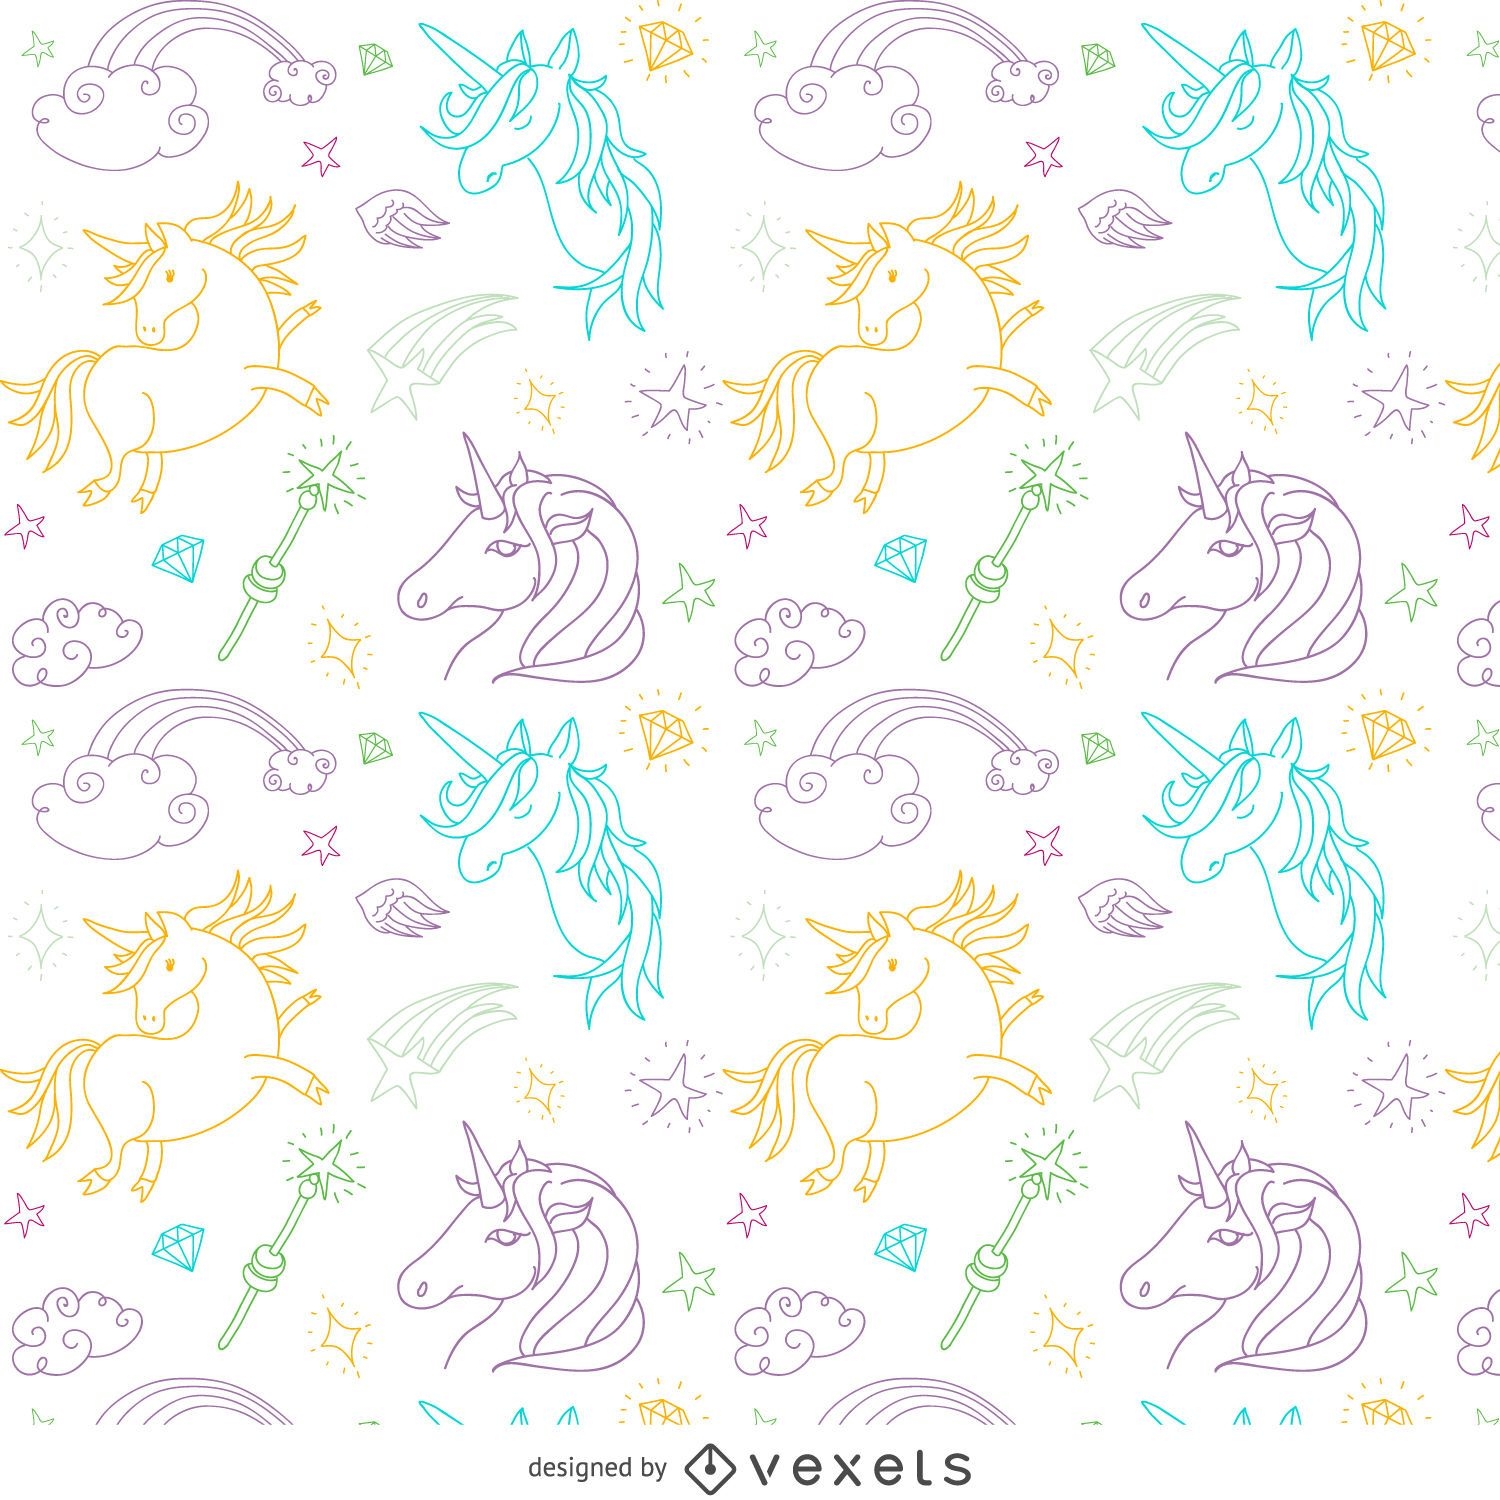 Unicorn outline drawing pattern